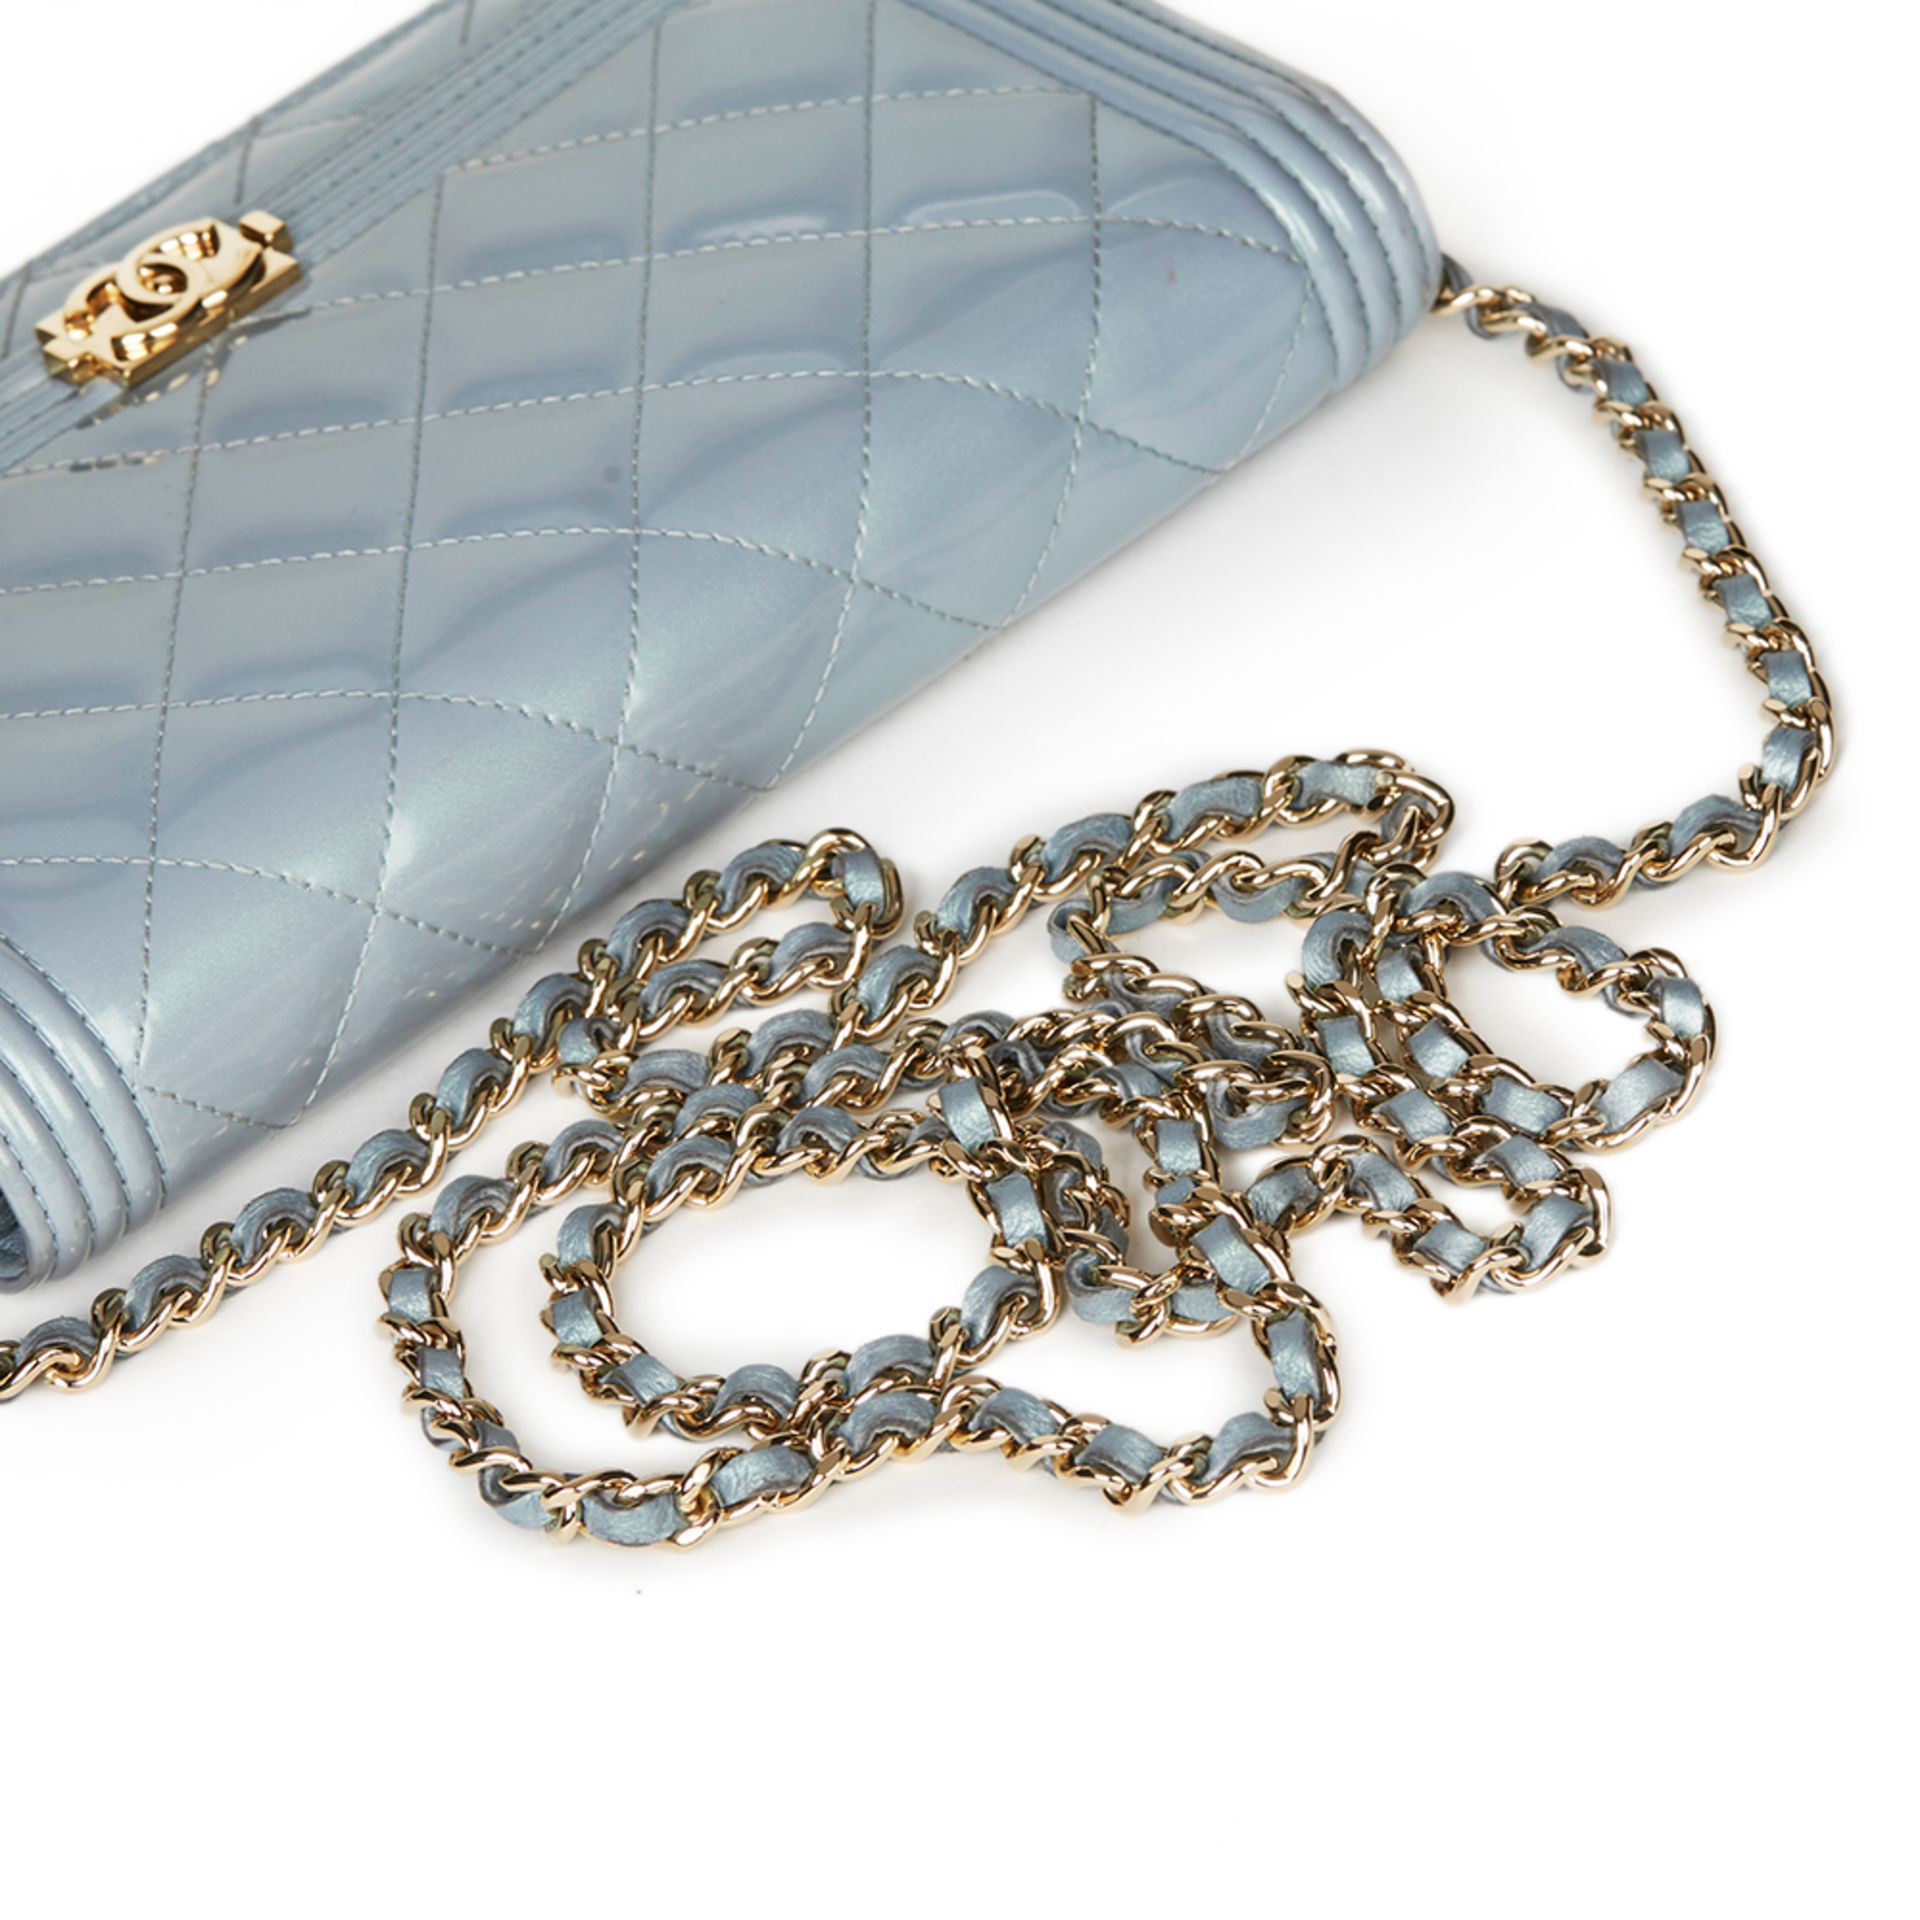 Blue Quilted Iridescent Calfskin Boy Wallet-on-Chain WOC - Image 4 of 9